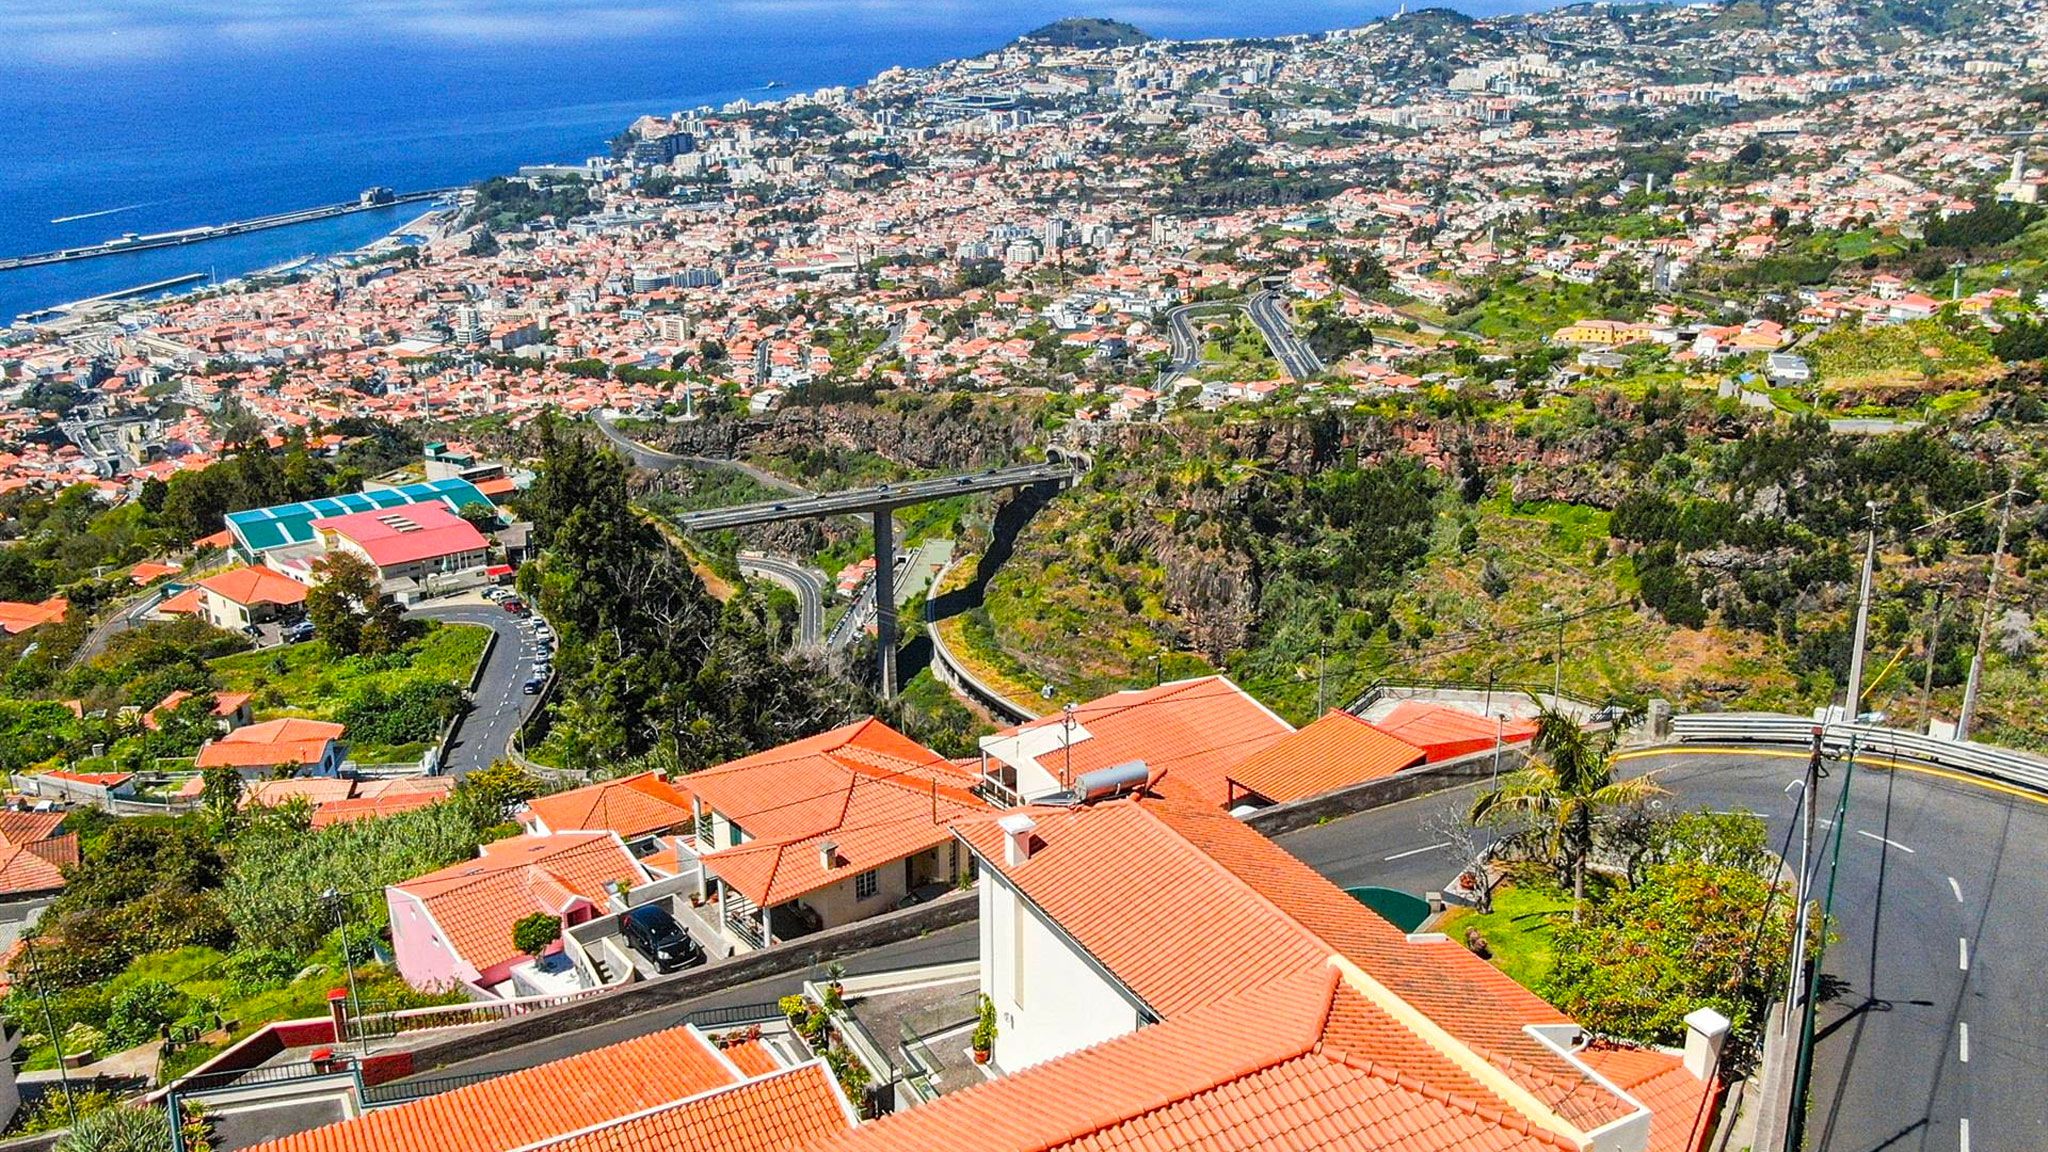 M585 View of Funchal